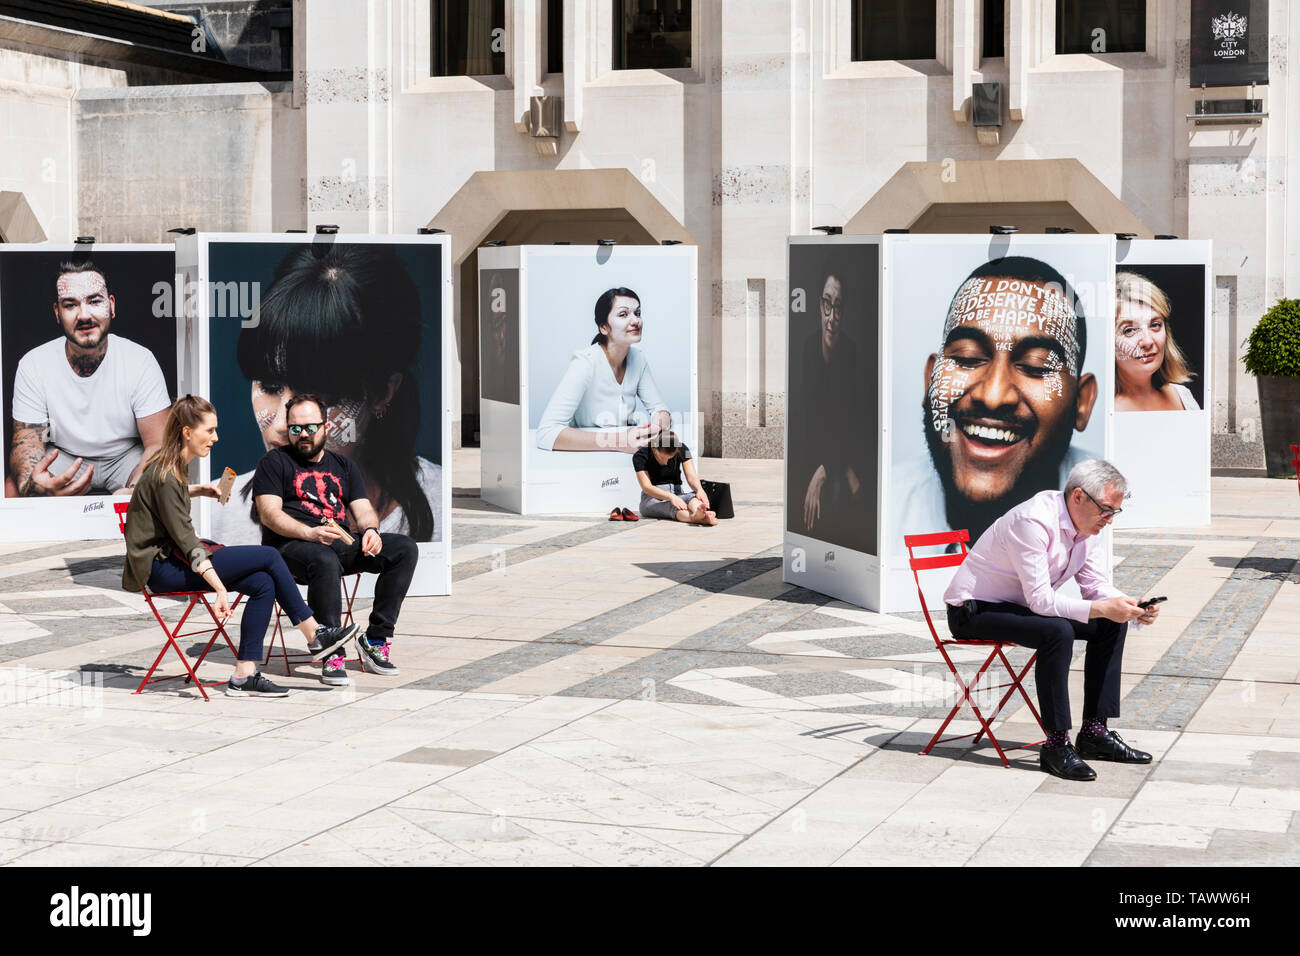 The Let's Talk campaign photography exhibition installed at the Guildhall Yard in London for Mental Health Awareness Week. Stock Photo